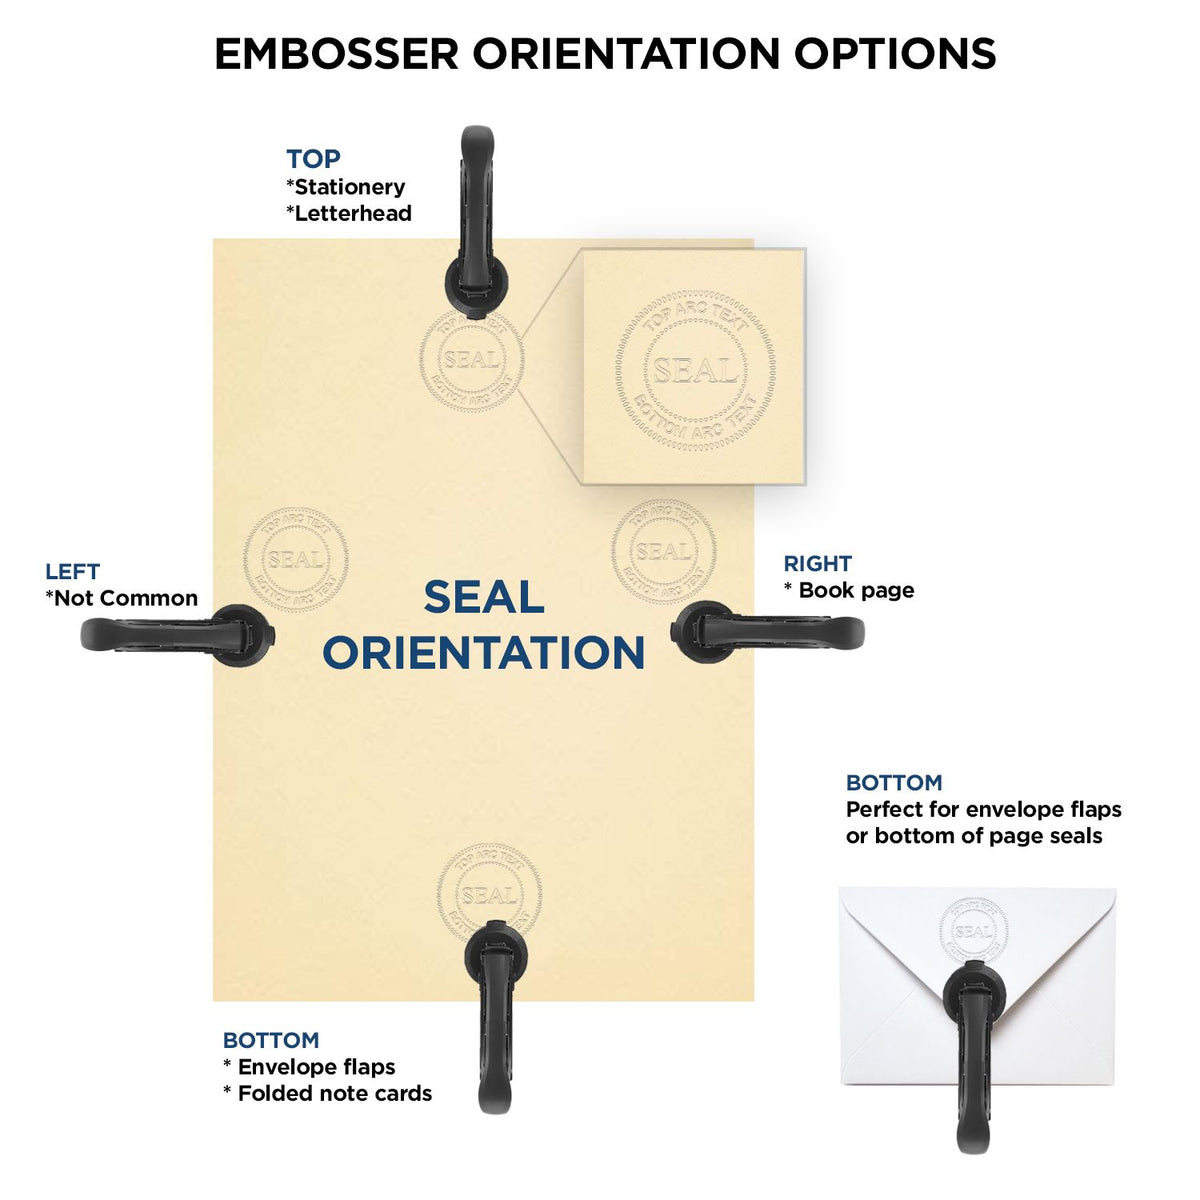 An infographic for the Long Reach South Carolina PE Seal showing embosser orientation, this is showing examples of a top, bottom, right and left insert.